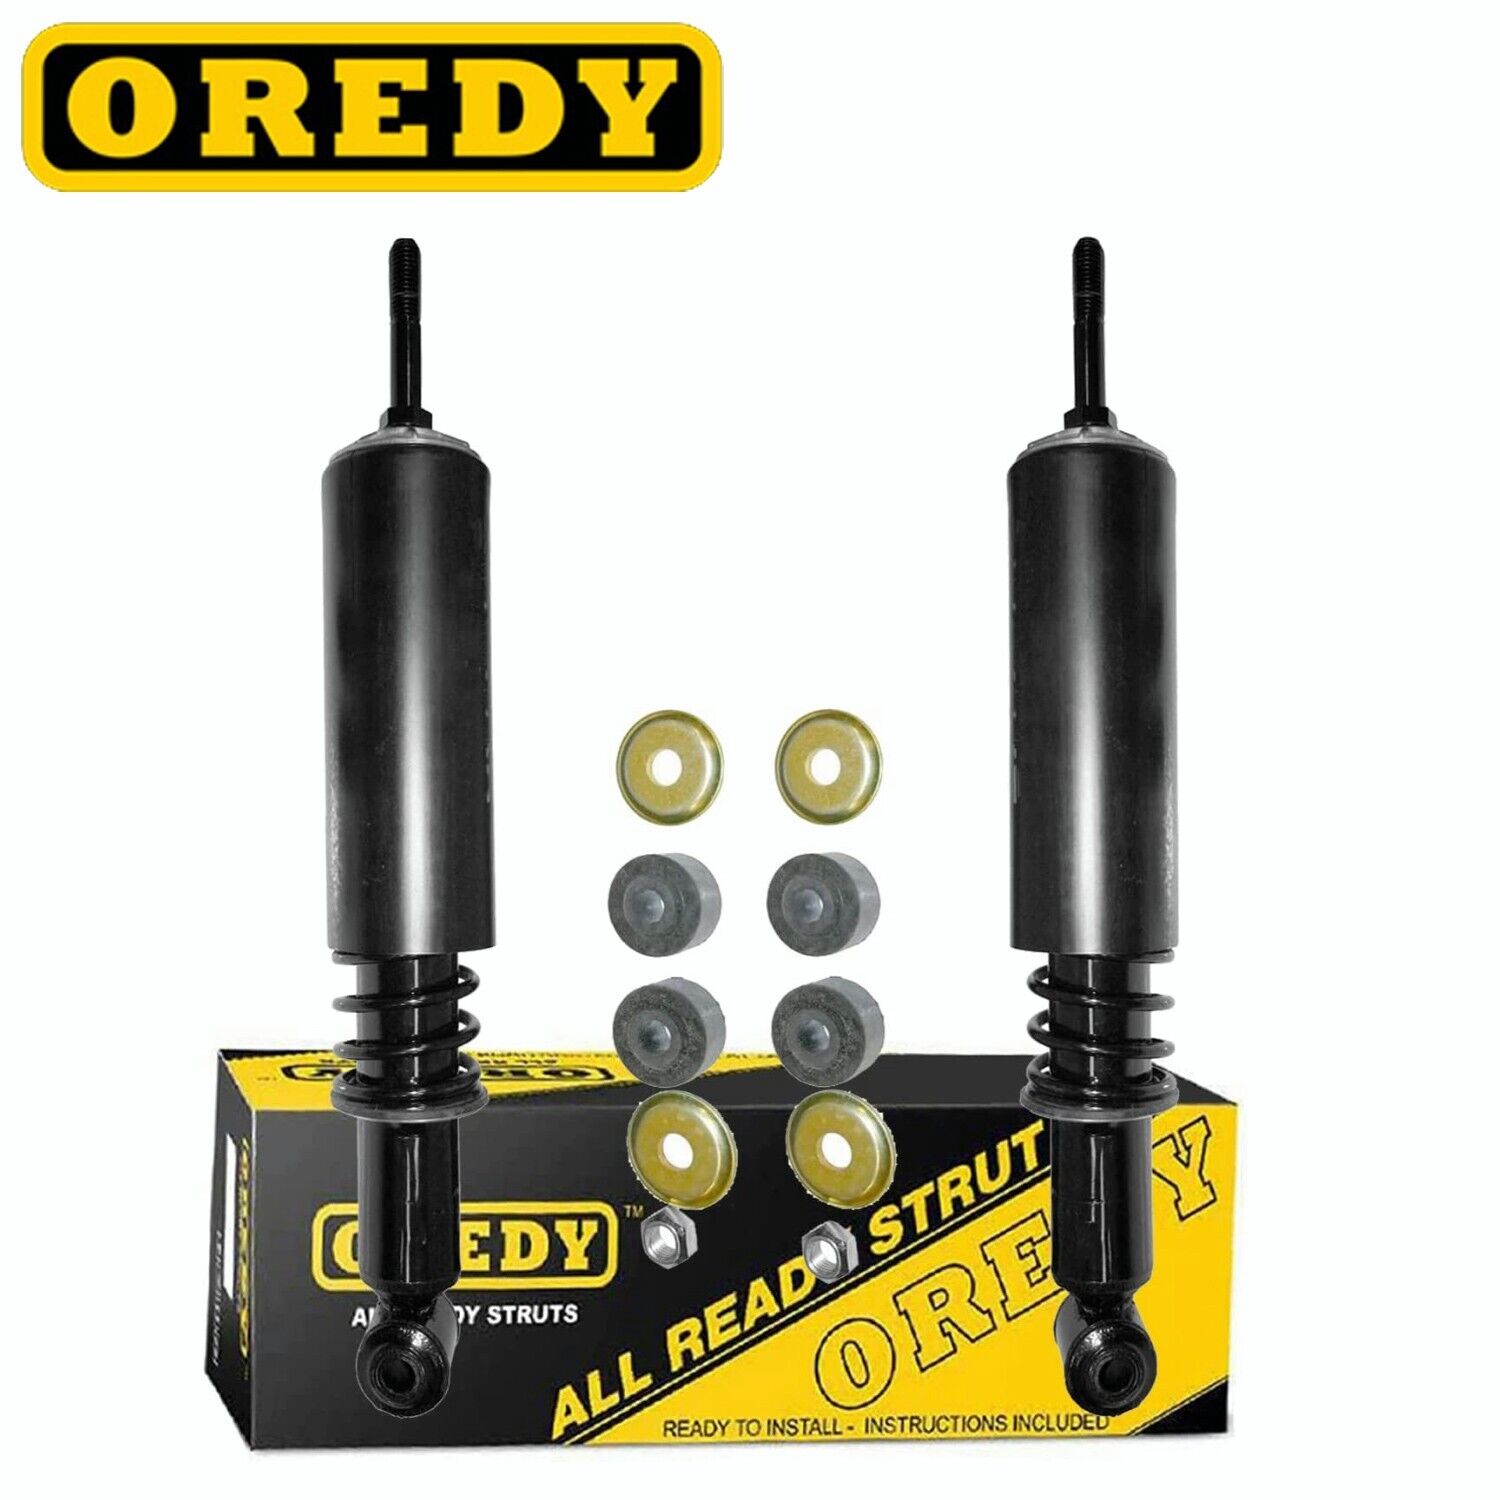 2PC Rear Shock Absorbers Assembly for Cadillac Deville Seville Eldorado